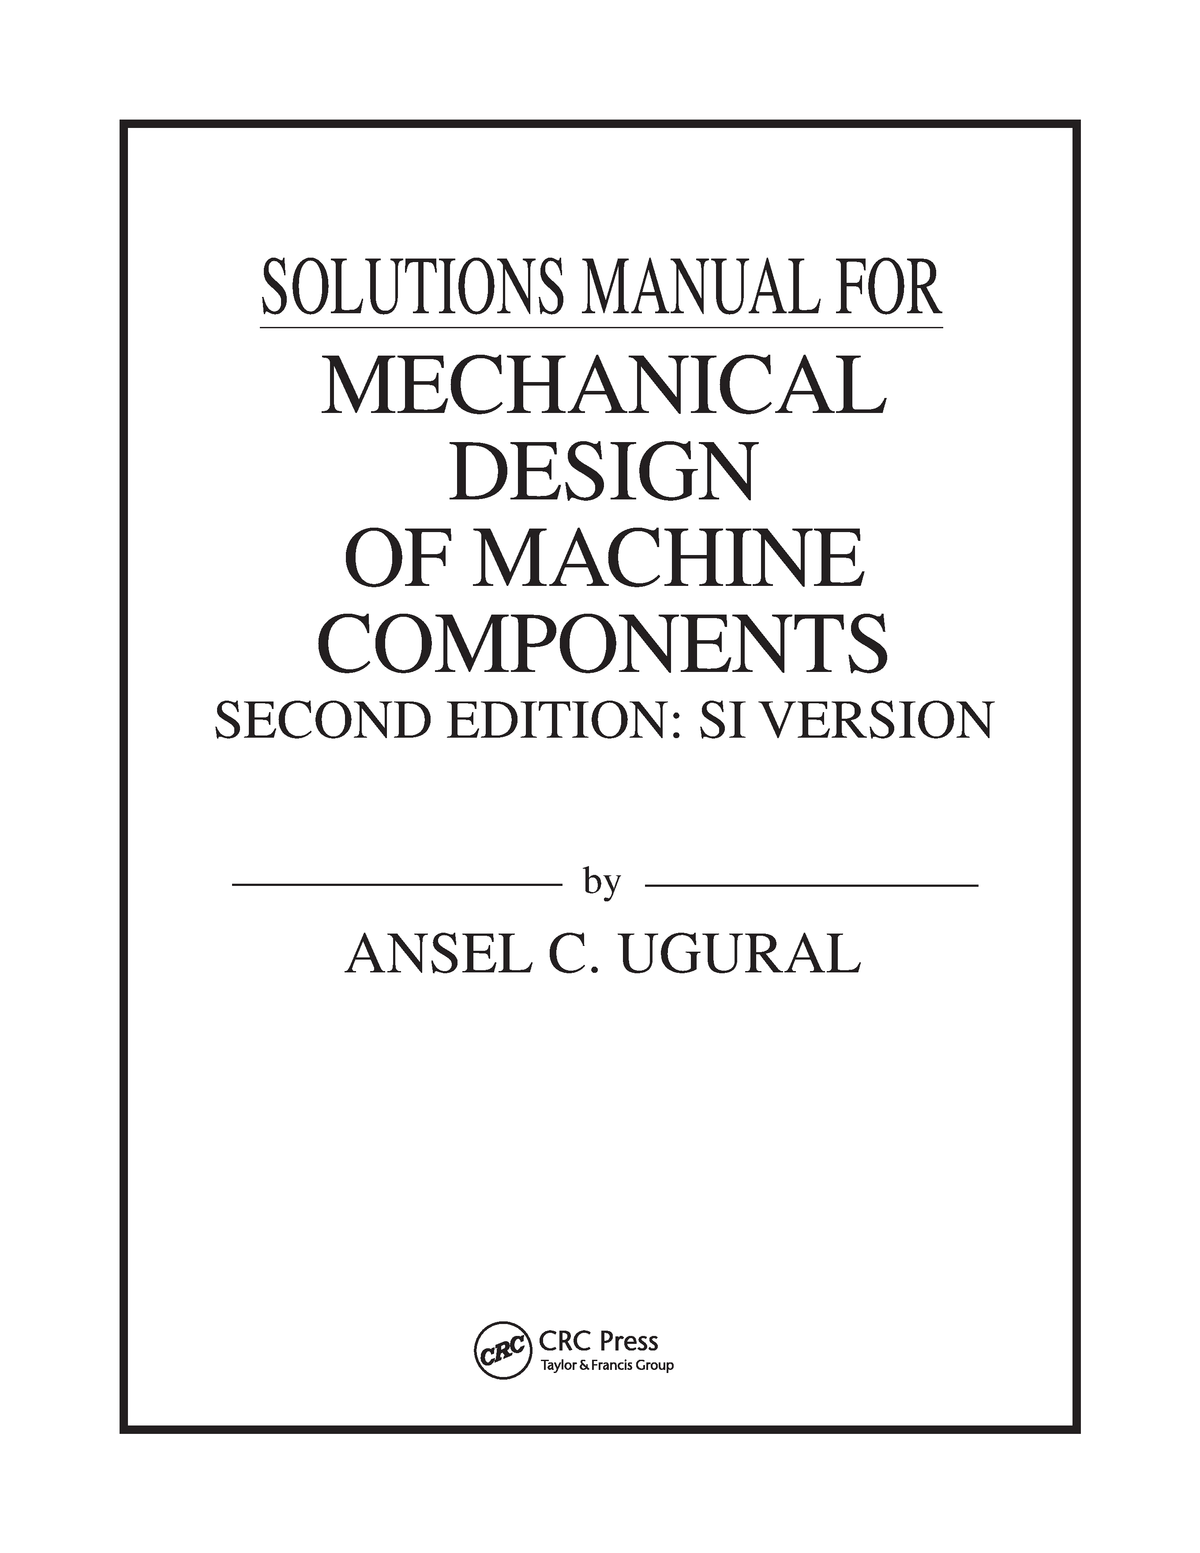 SOLUTIONS MANUAL FOR by MECHANICAL DESIGN OF MACHINE COMPONENTS SECOND EDITION SI VERSION Thumb_1200_1553